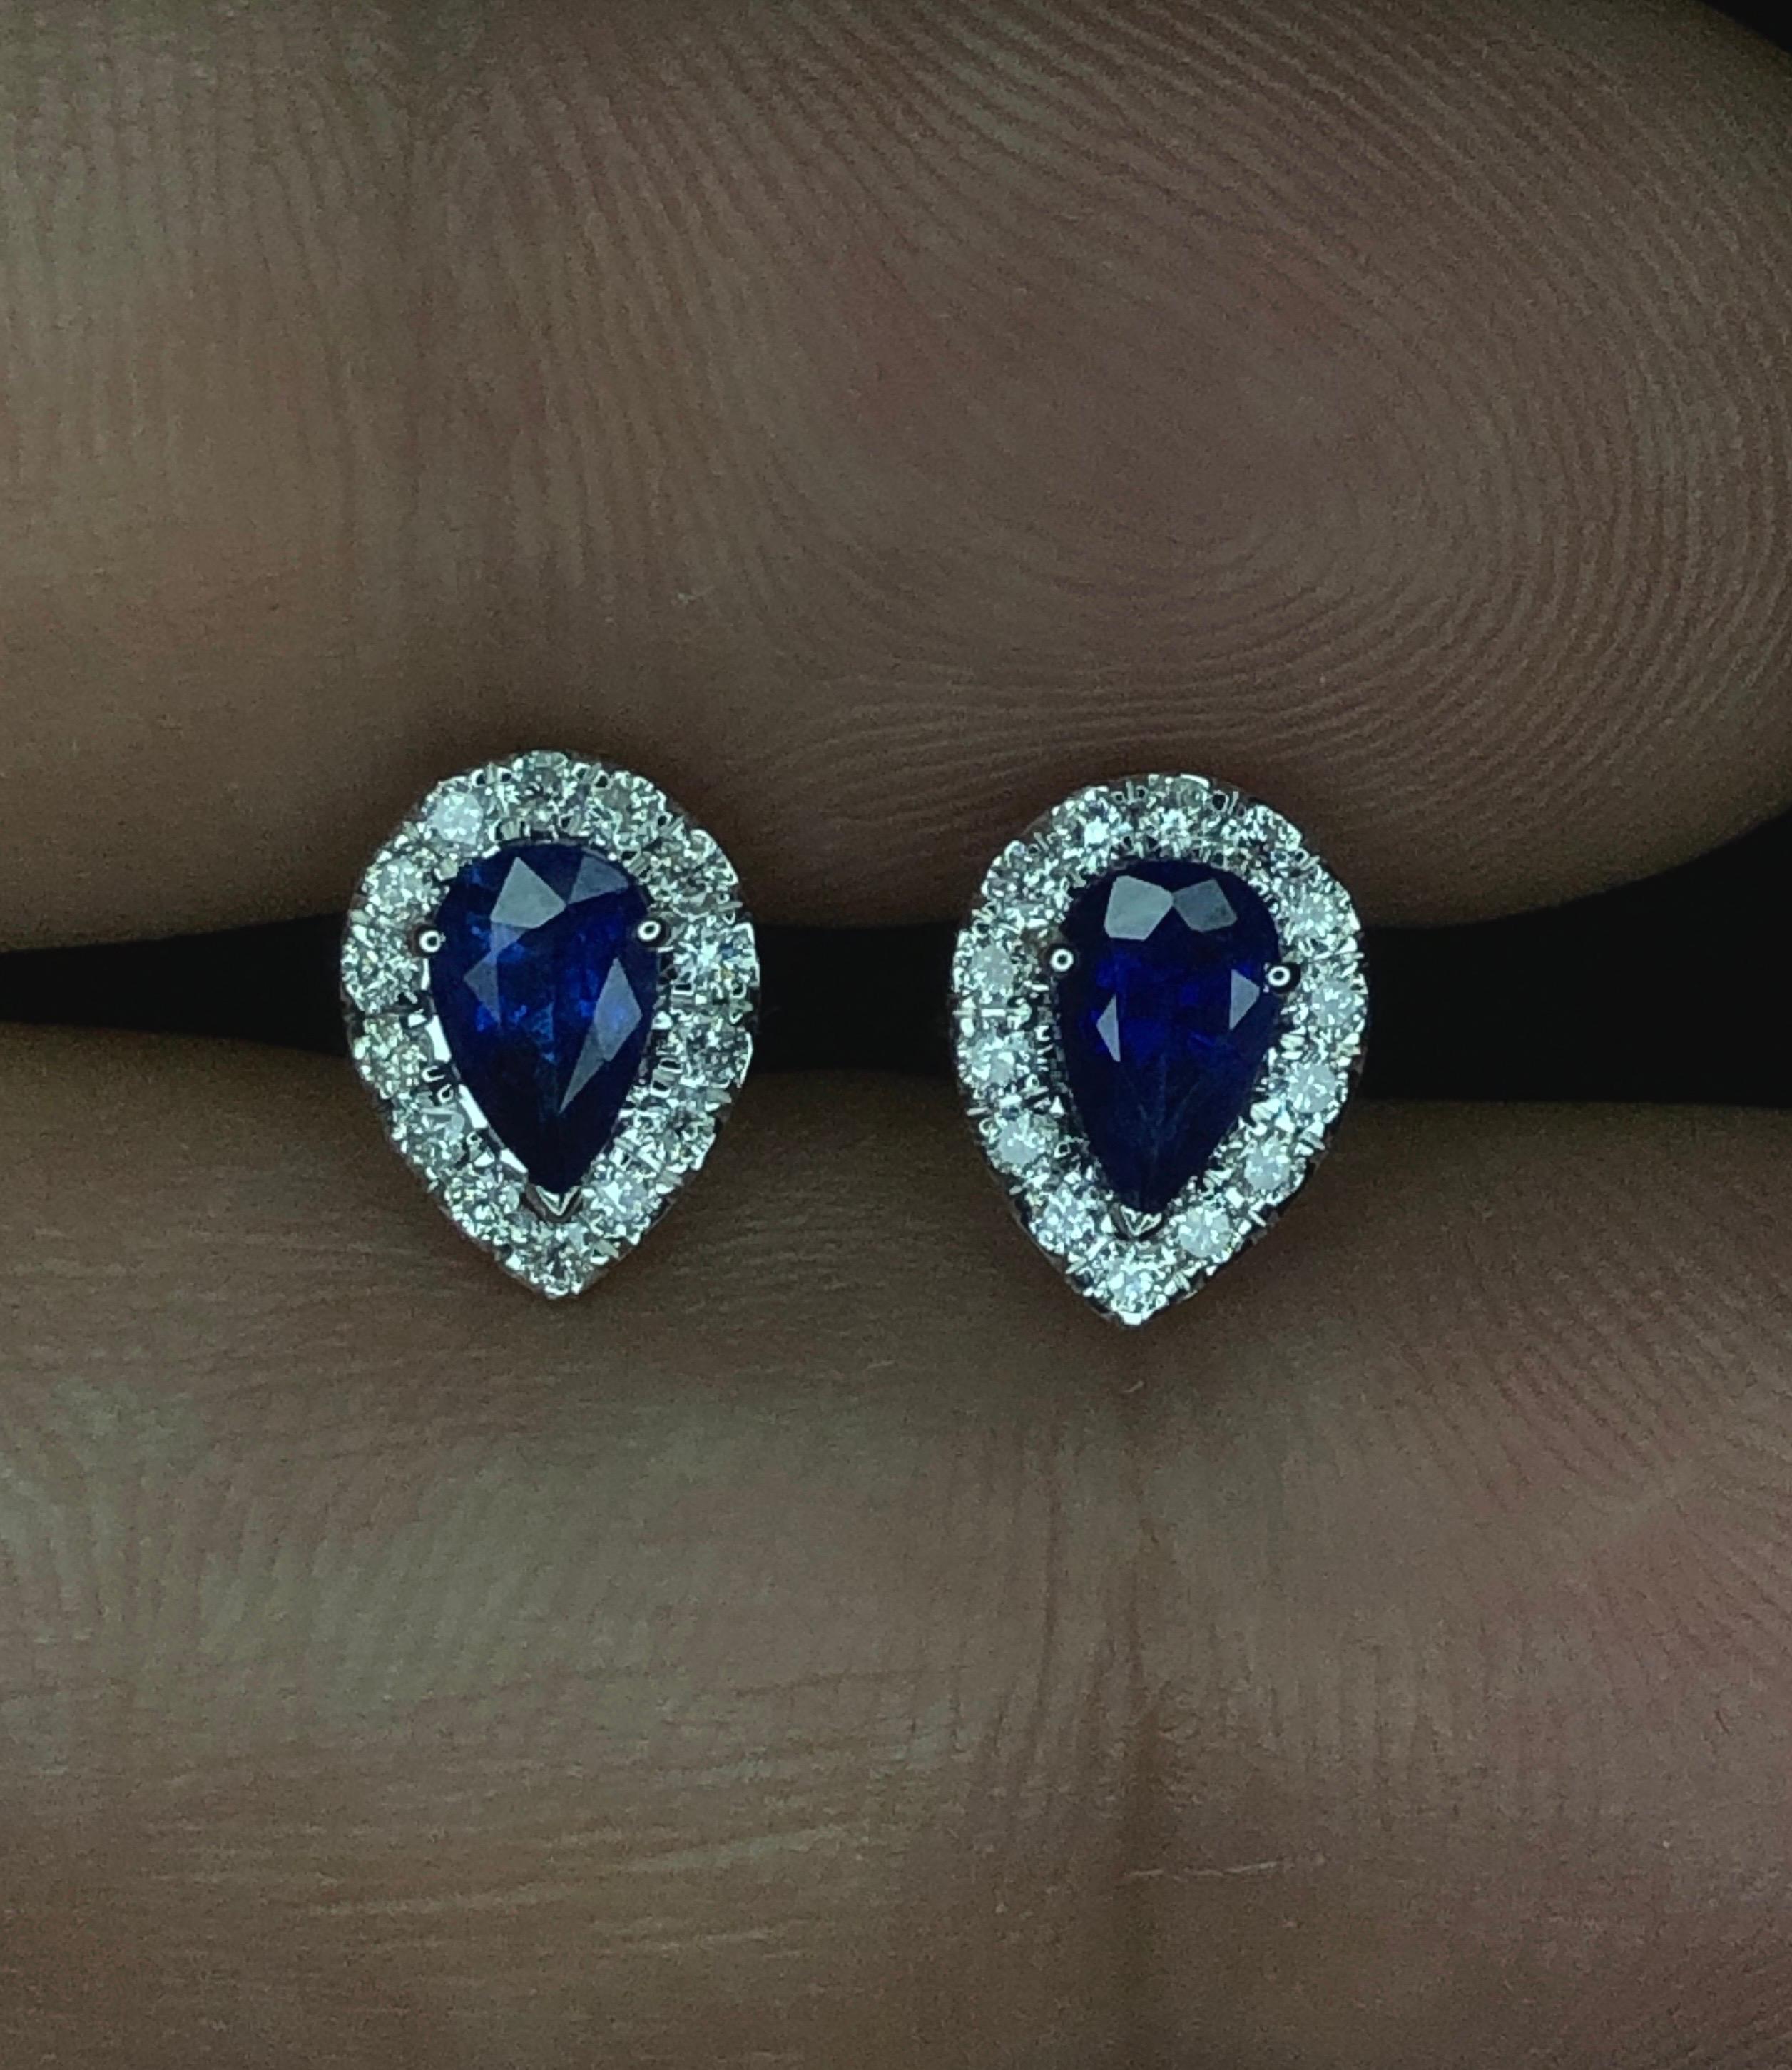 Introducing our exquisite Pear Shape Ceylon Sapphire Earrings, crafted in 18k gold and adorned with stunning diamonds. Each earring boasts a lustrous pear-shaped Ceylon sapphires, In royal Blue.surrounded by a halo of brilliant diamonds. Elevate